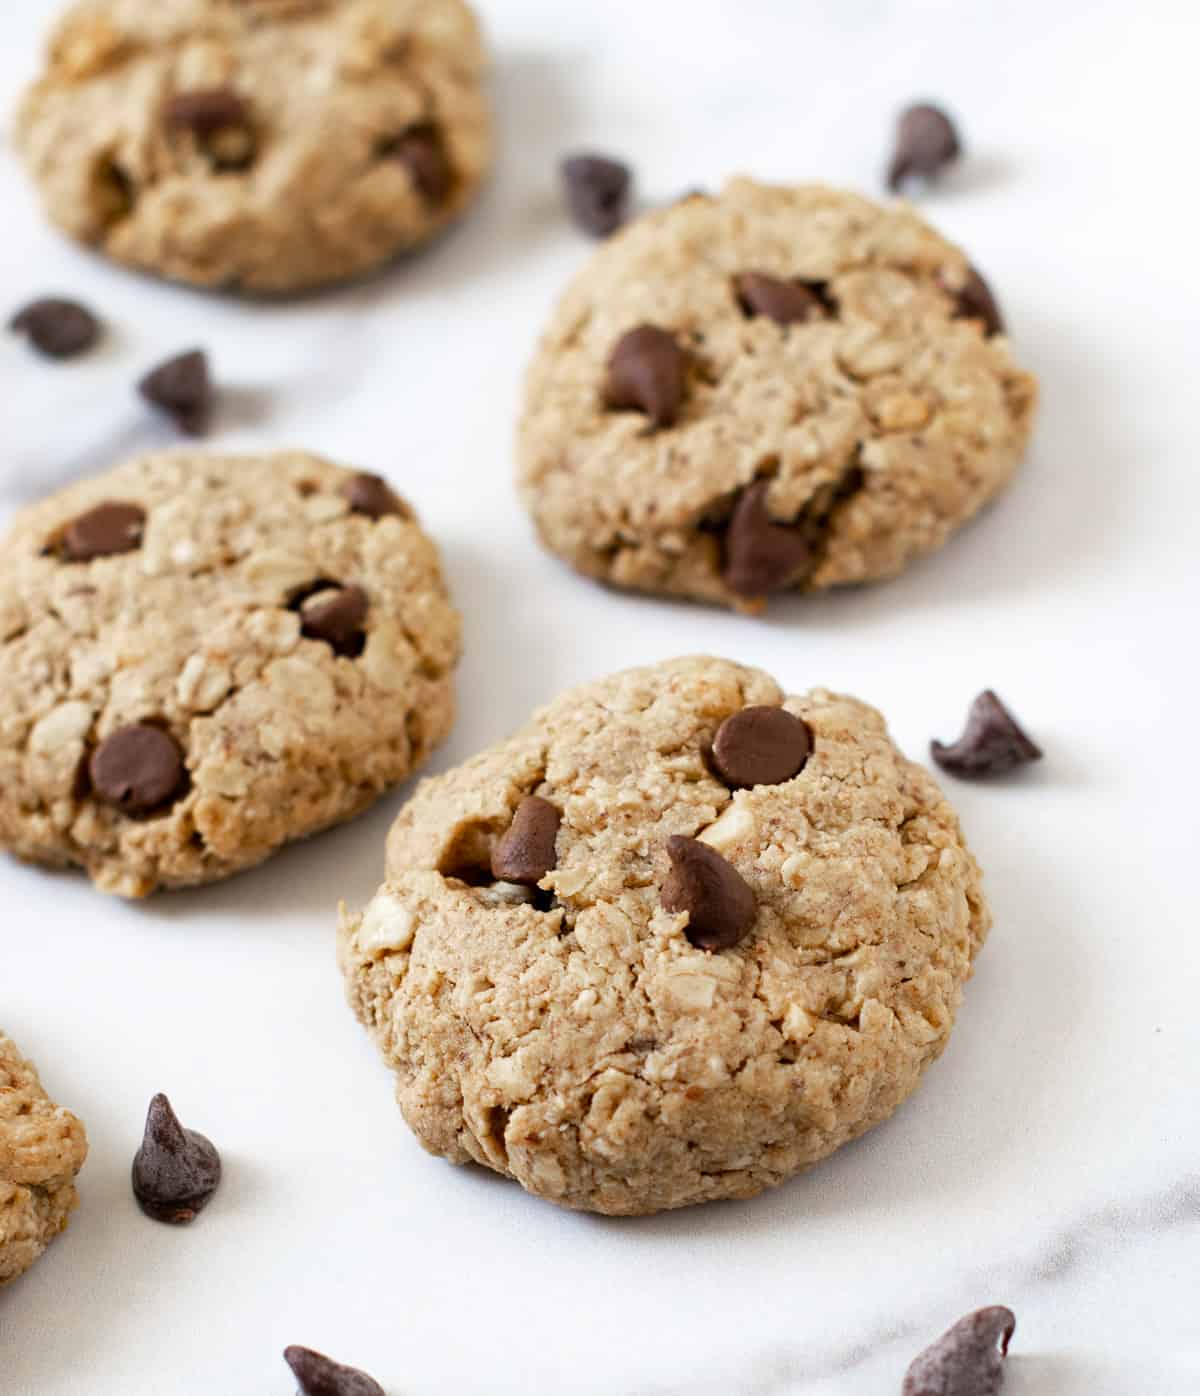 Peanut butter oatmeal cookies with chocolate chips